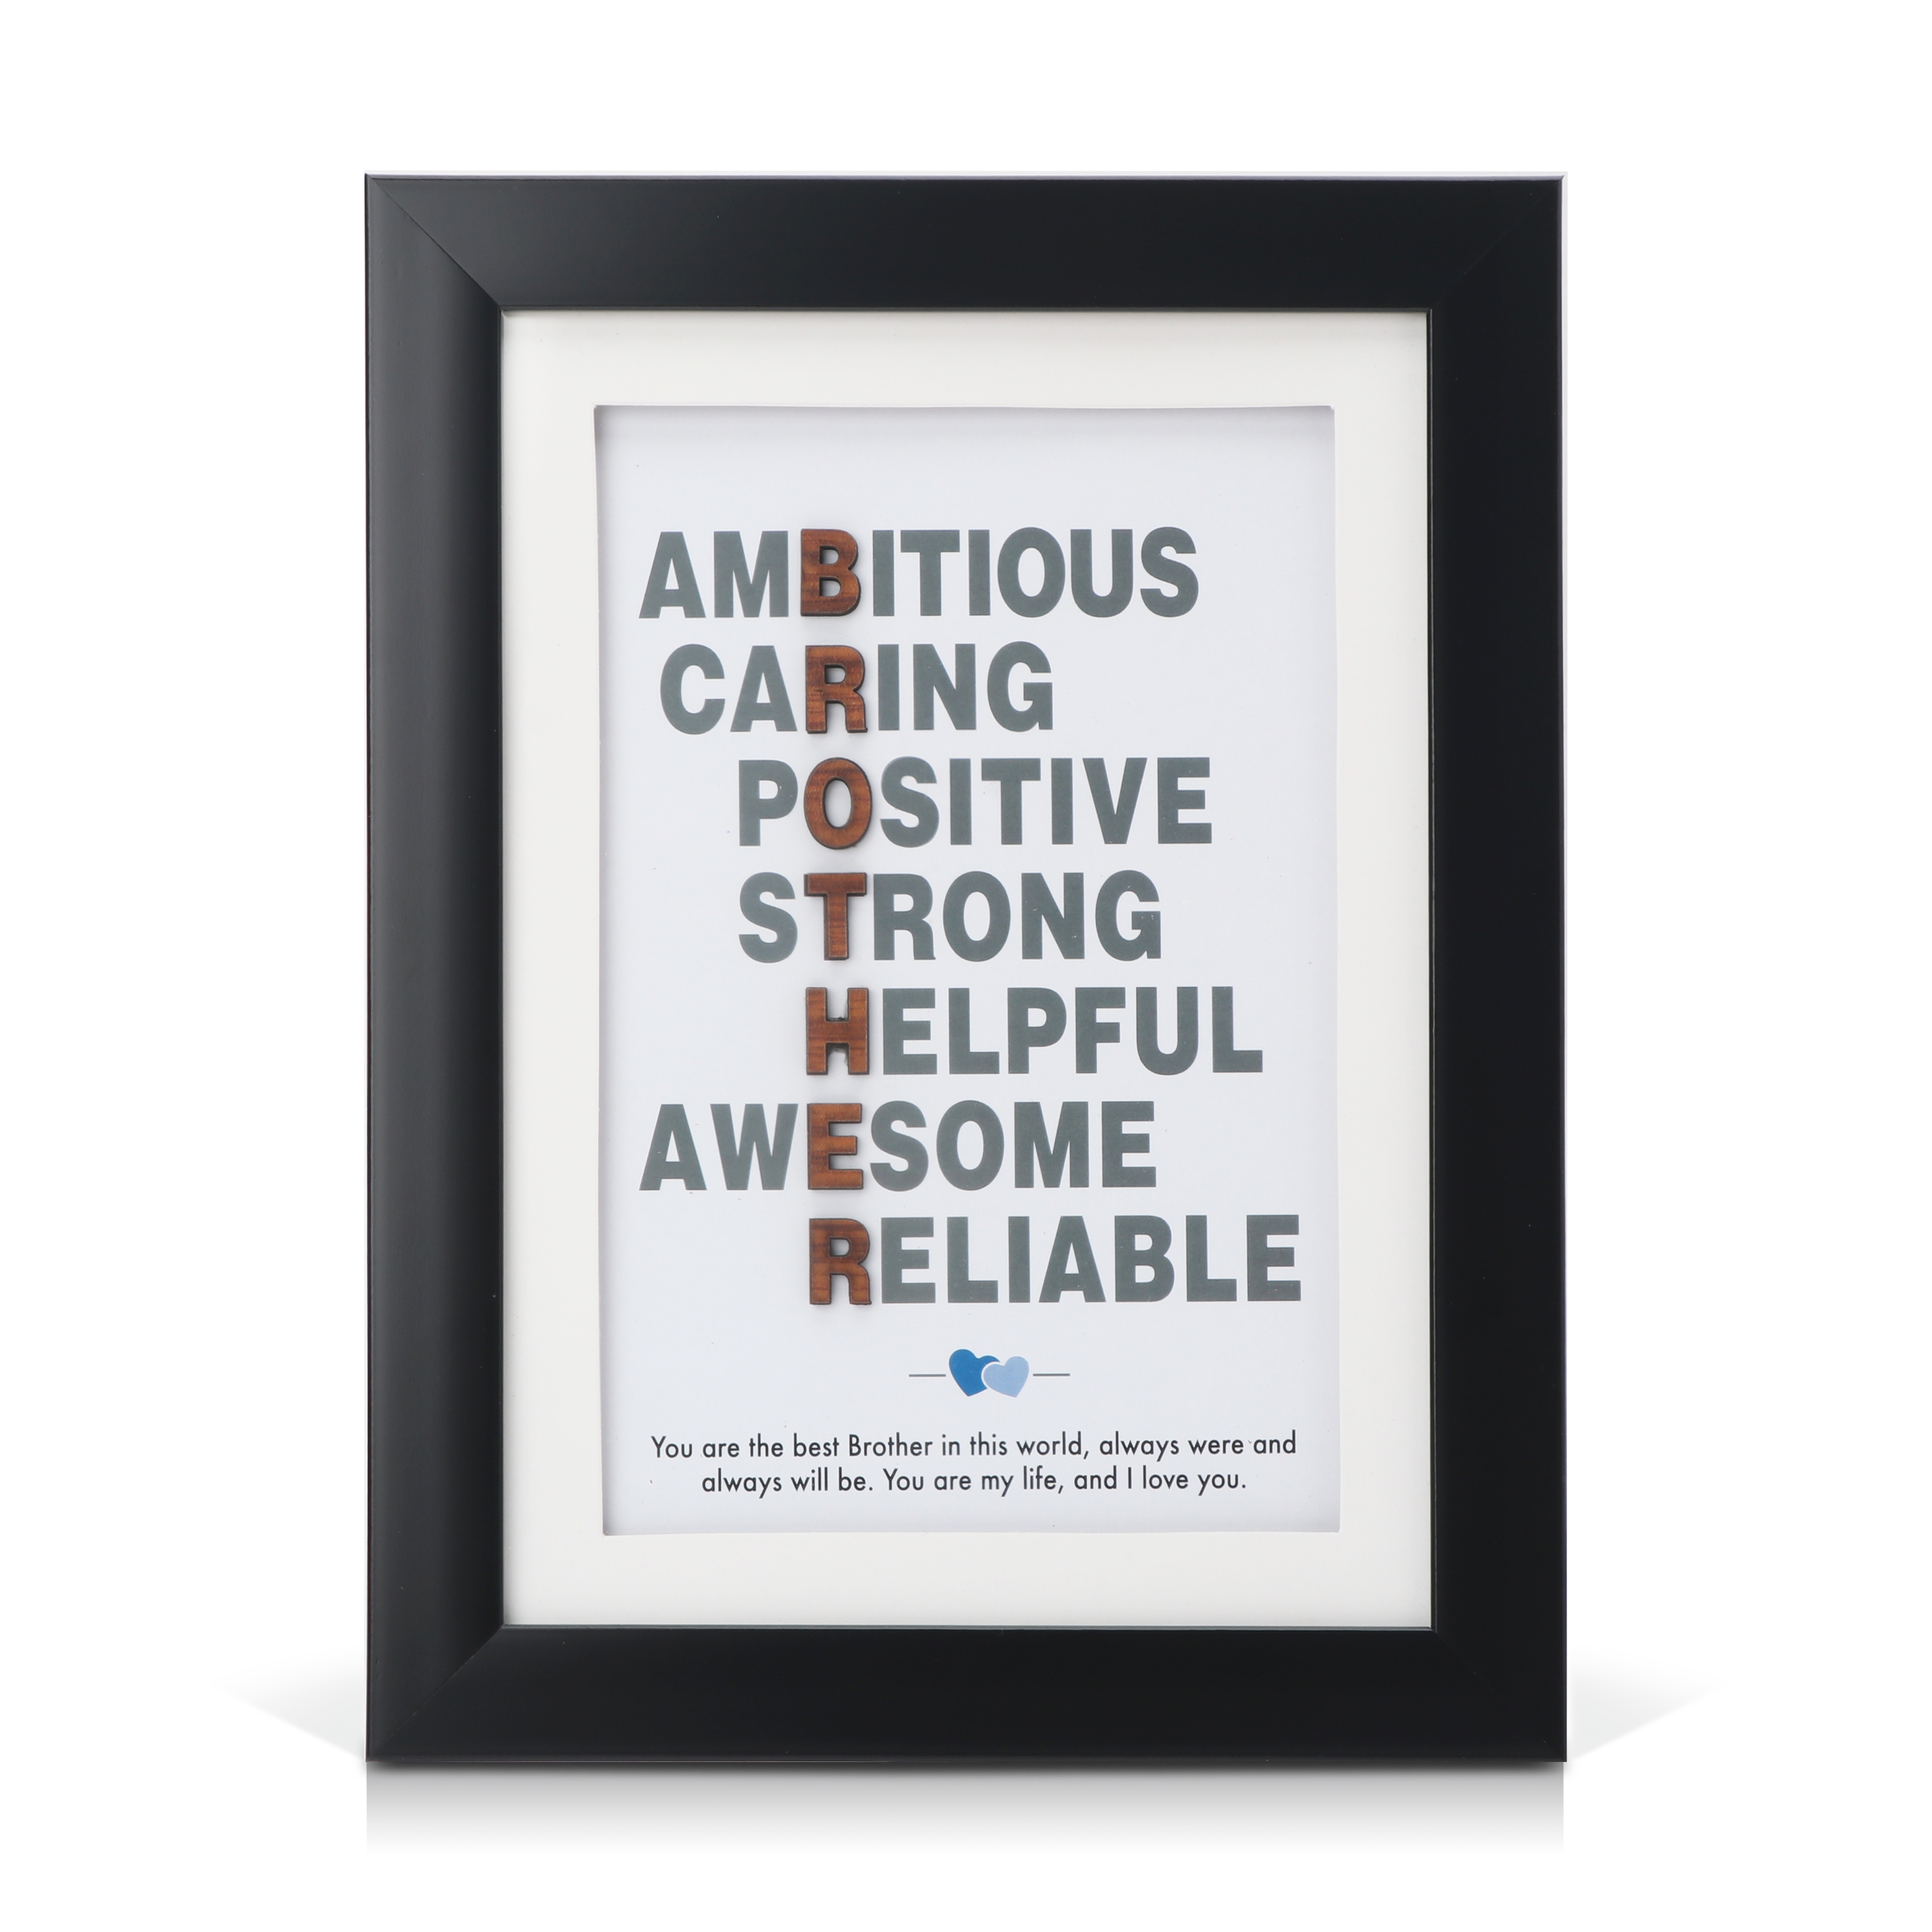 Archies | Archies Quotation Photo Frame with Greeting Card for Brother